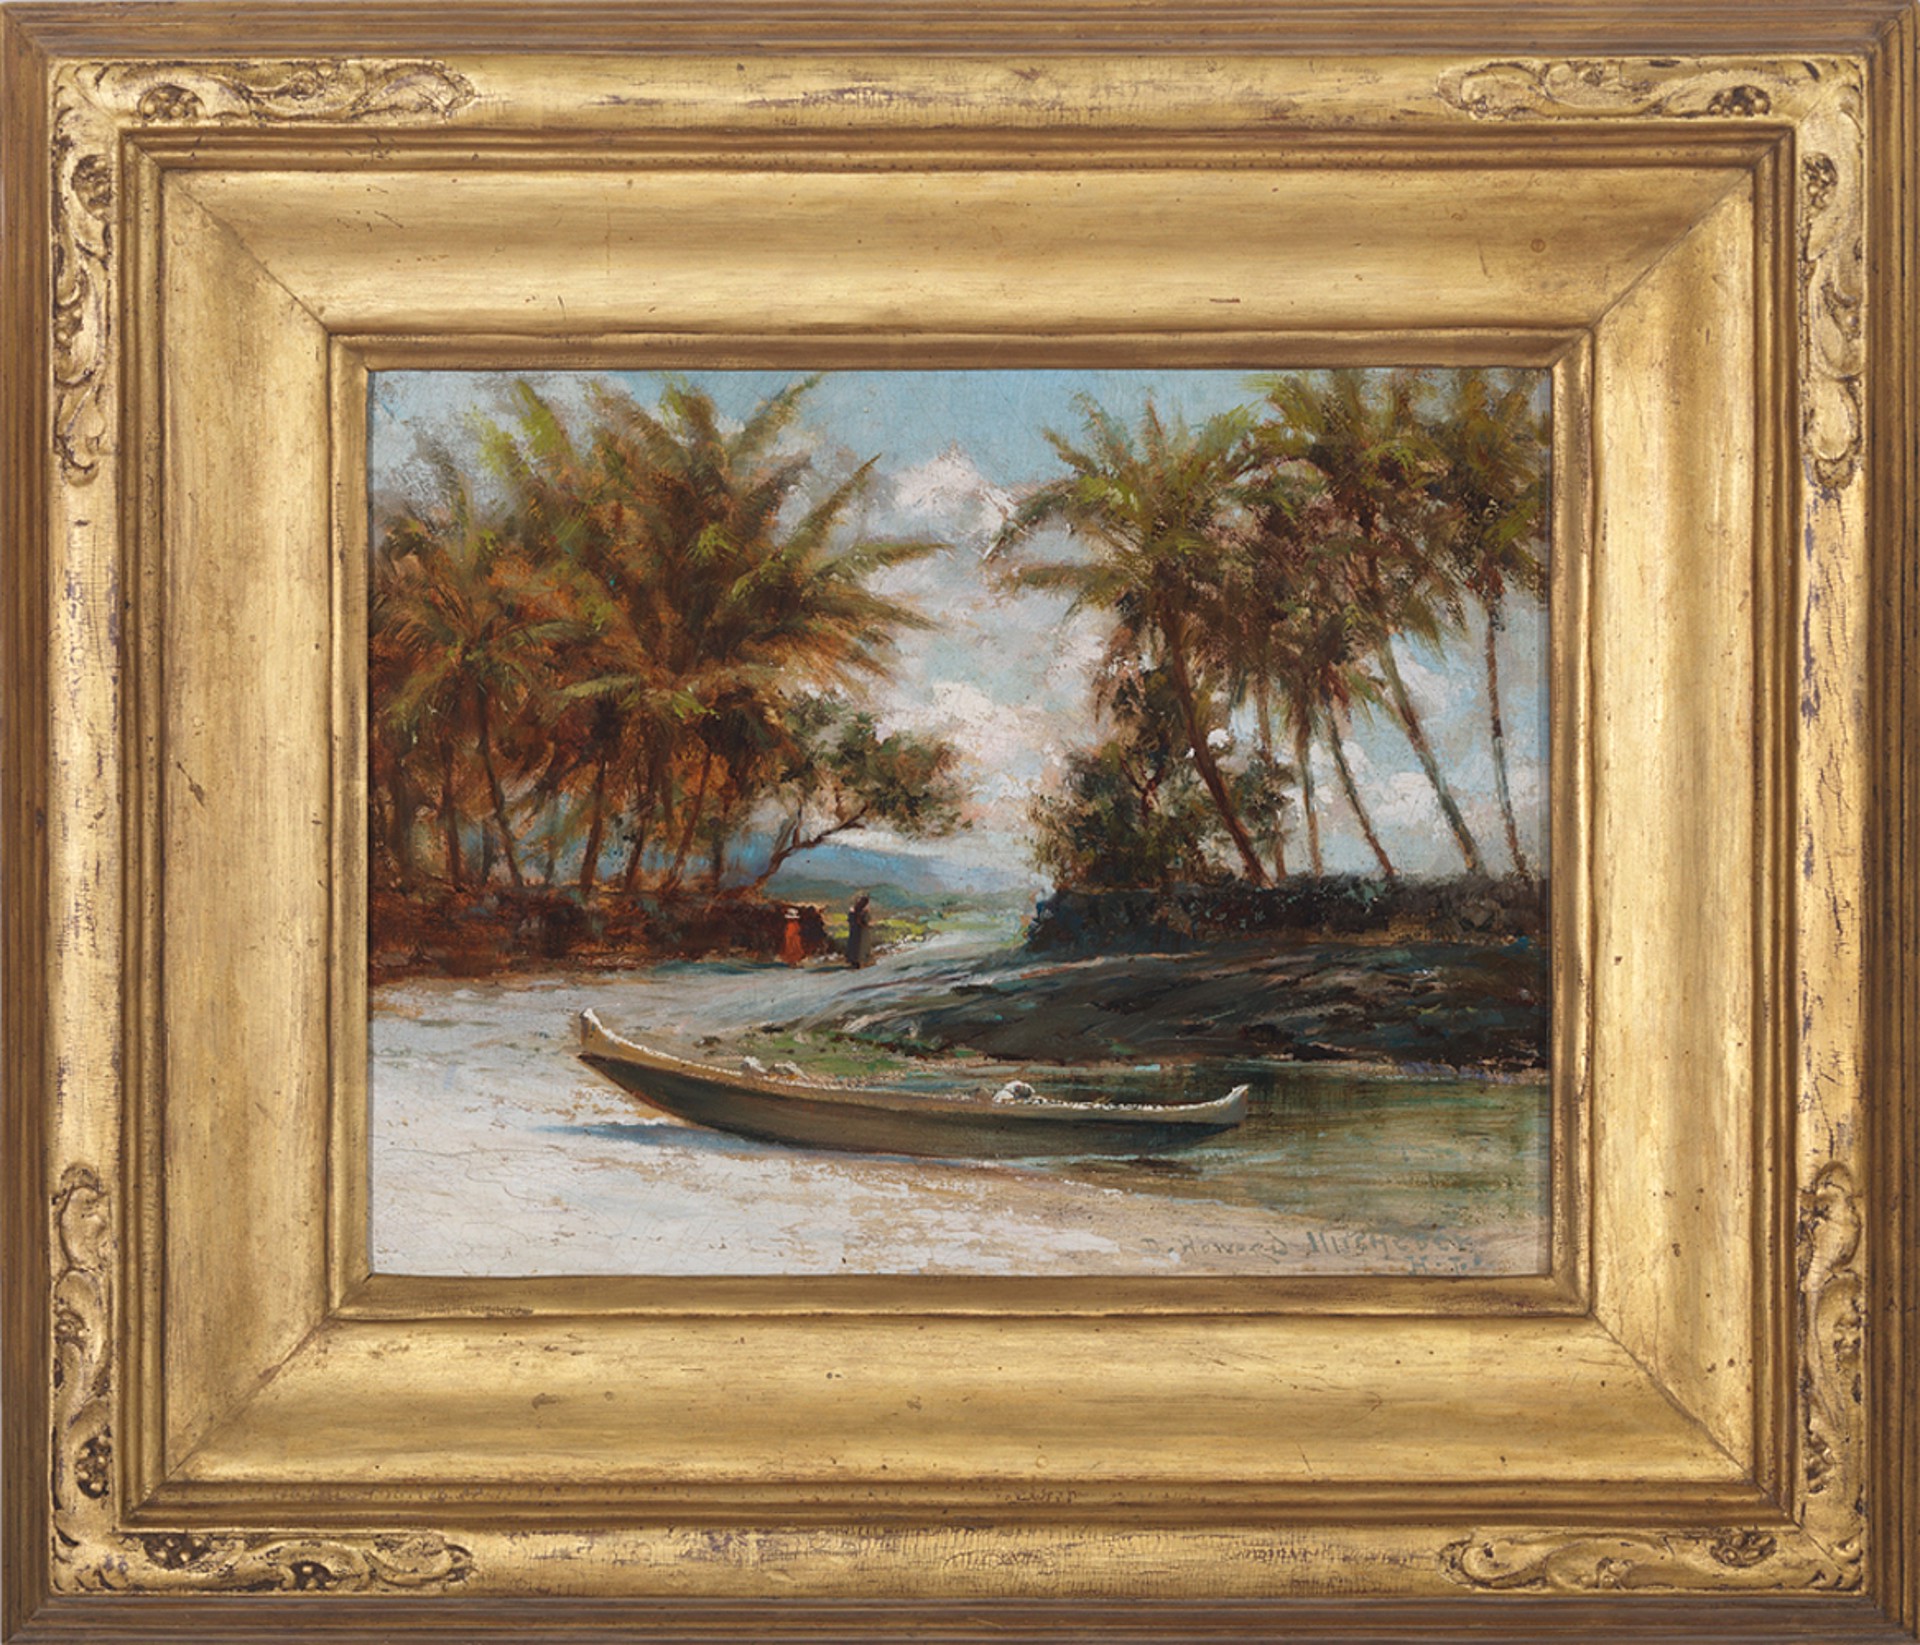 Hilo Bay with Canoe by D. Howard Hitchcock